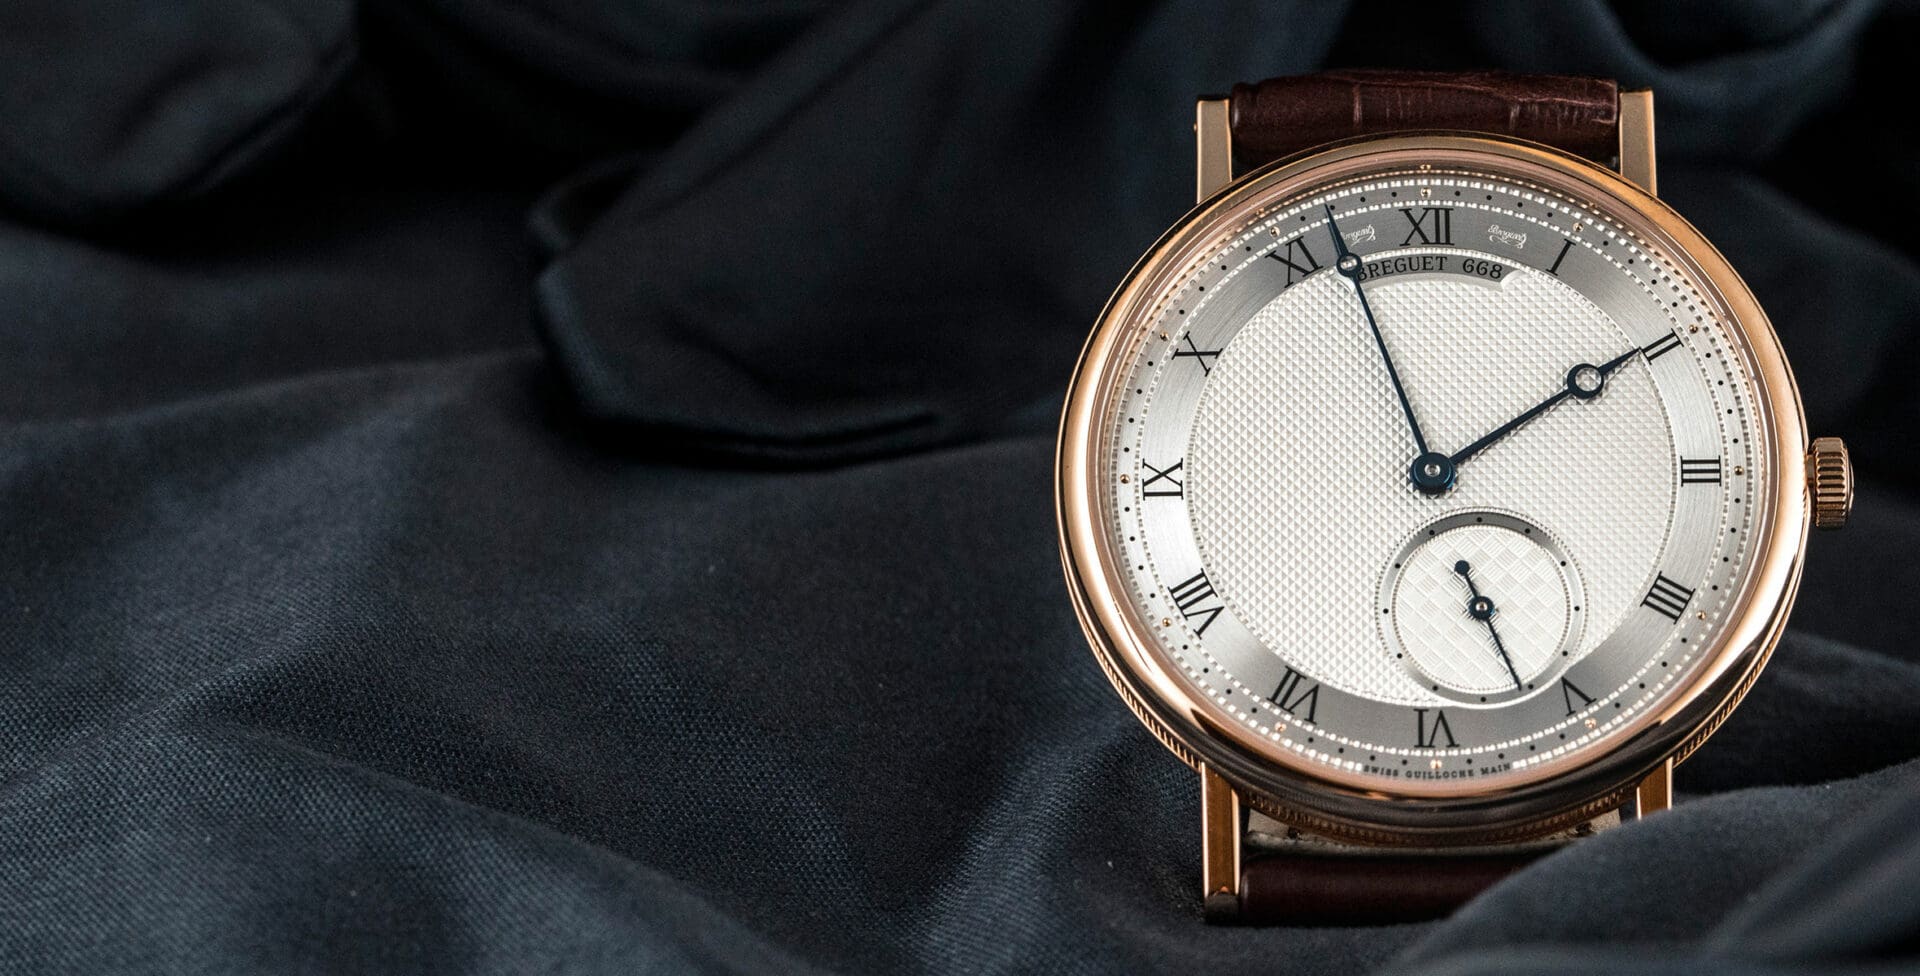 IN-DEPTH: The Breguet Classique 7147 – taking the dull out of dress watch